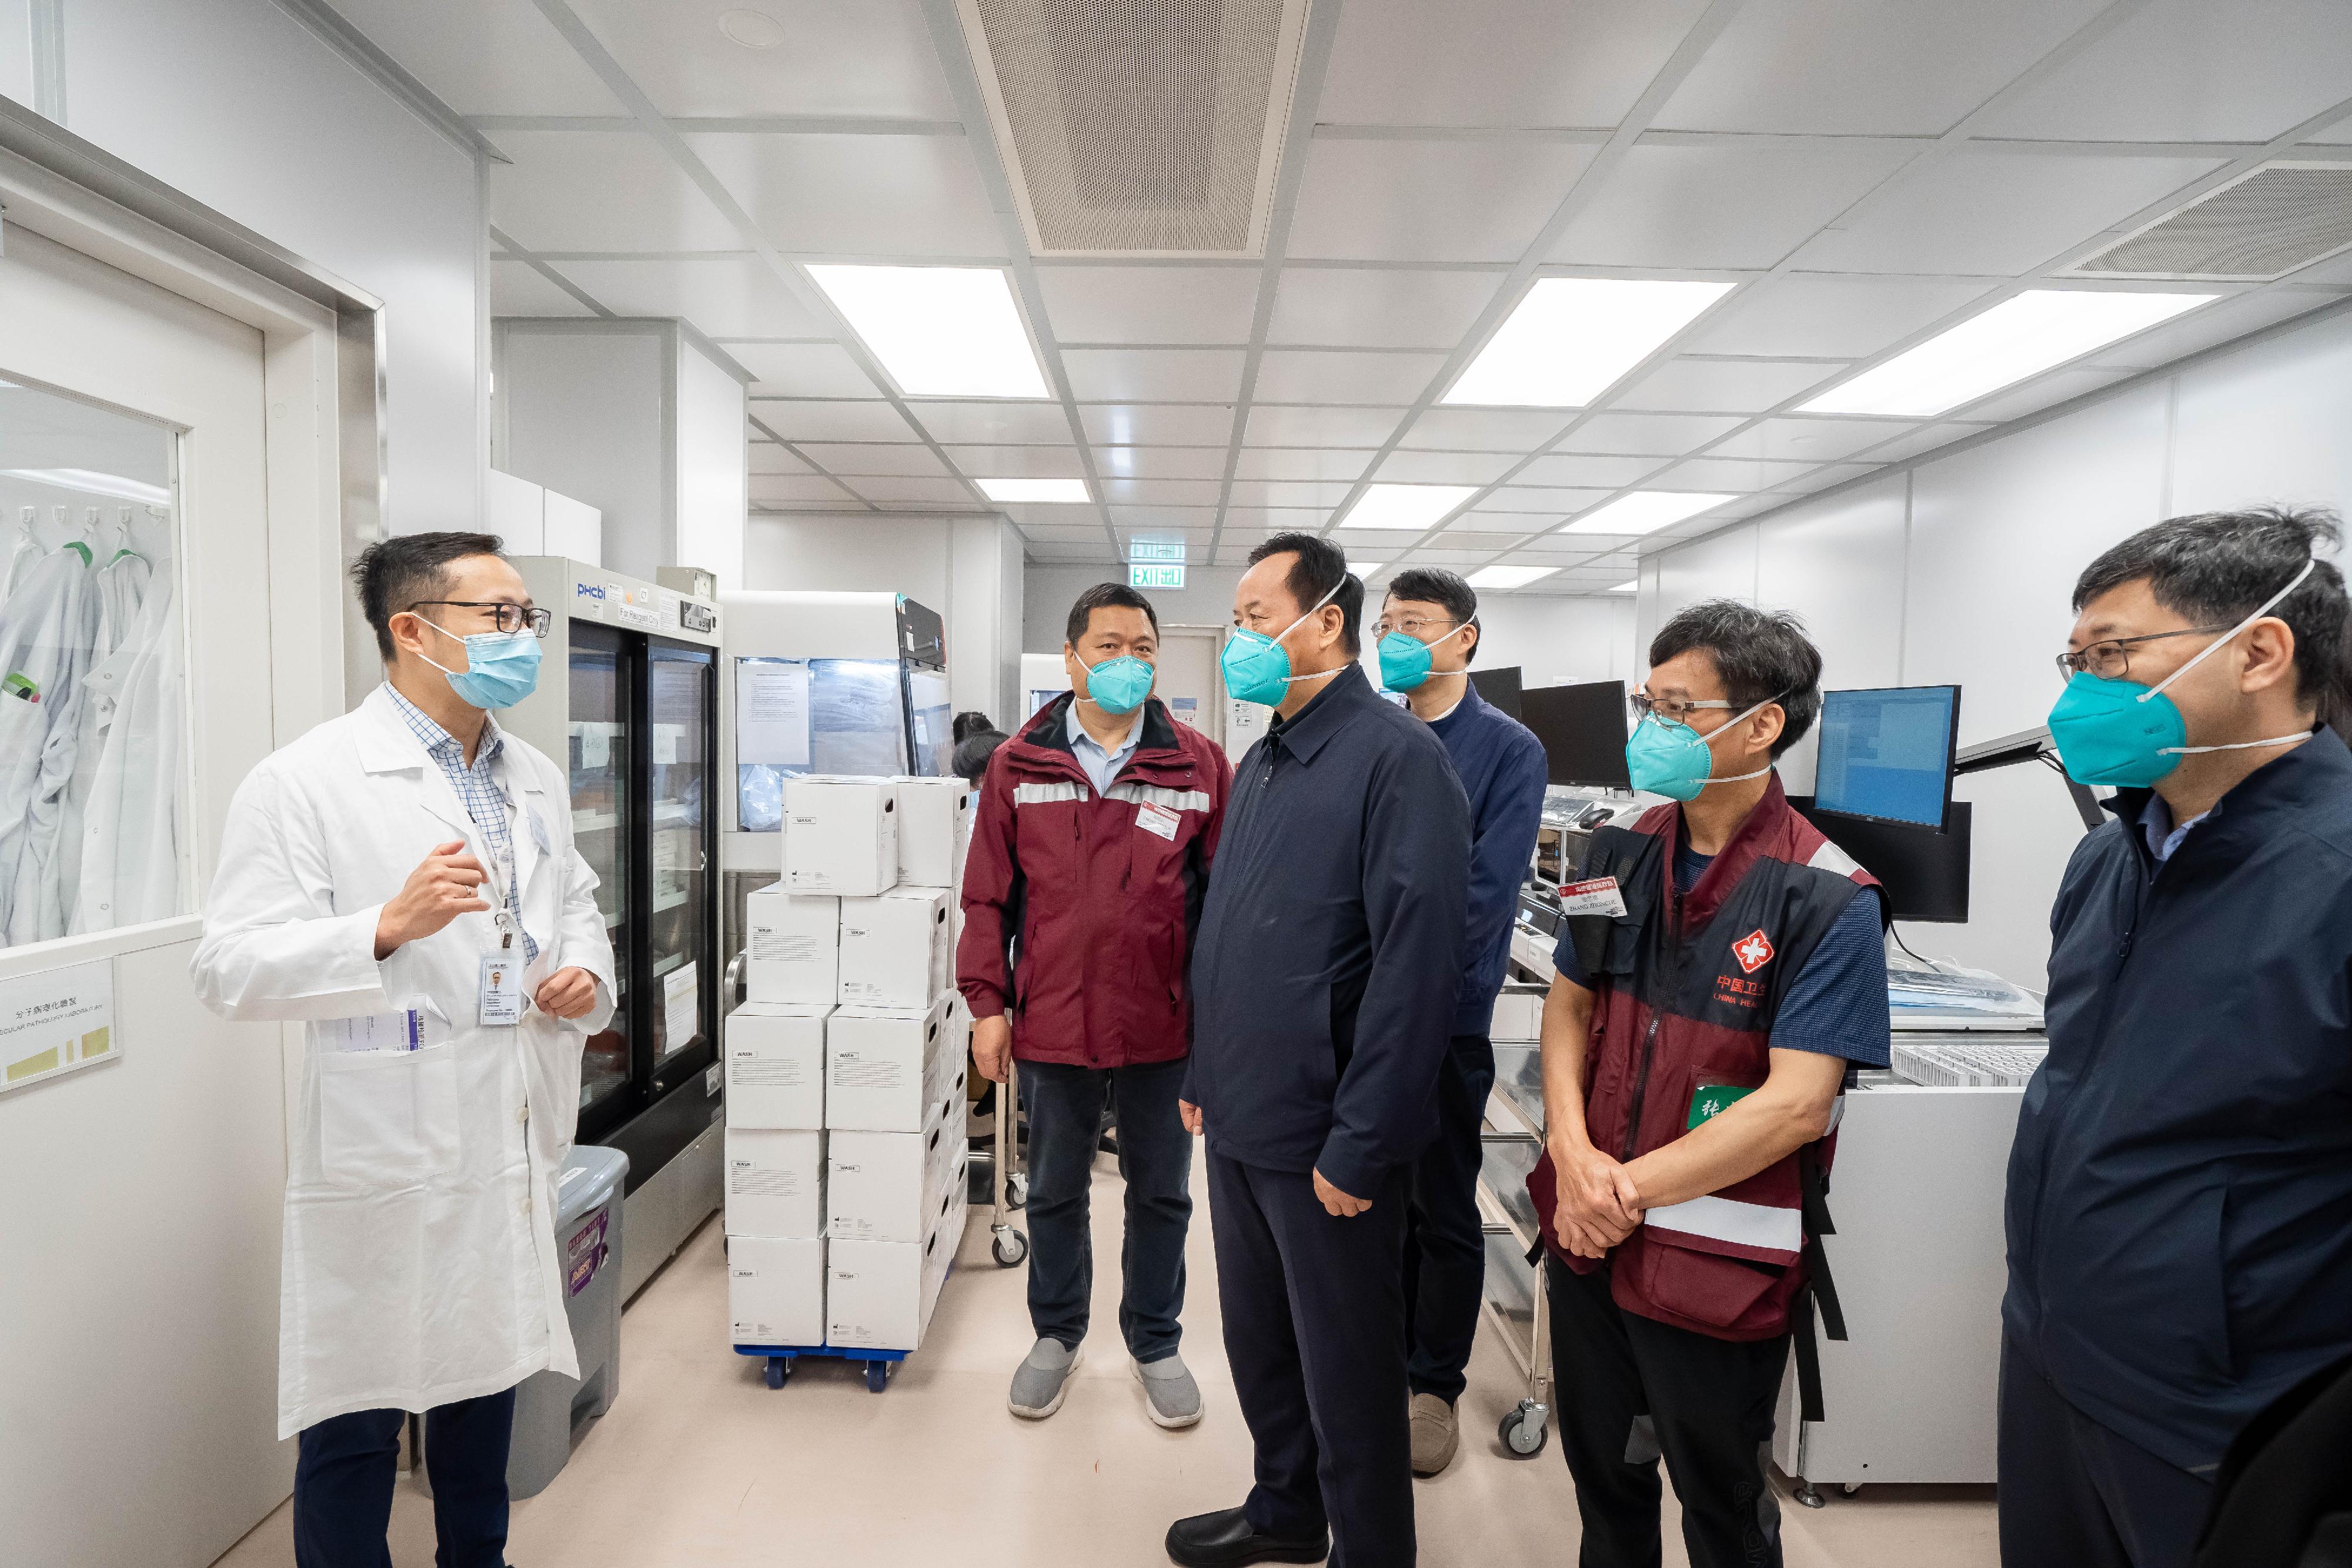 The Mainland Chinese medicine expert group of the Central Authorities today (April 1) visited the North Lantau Hospital Hong Kong Infection Control Centre’s laboratory to understand the testing capacity and specimen handling procedure.